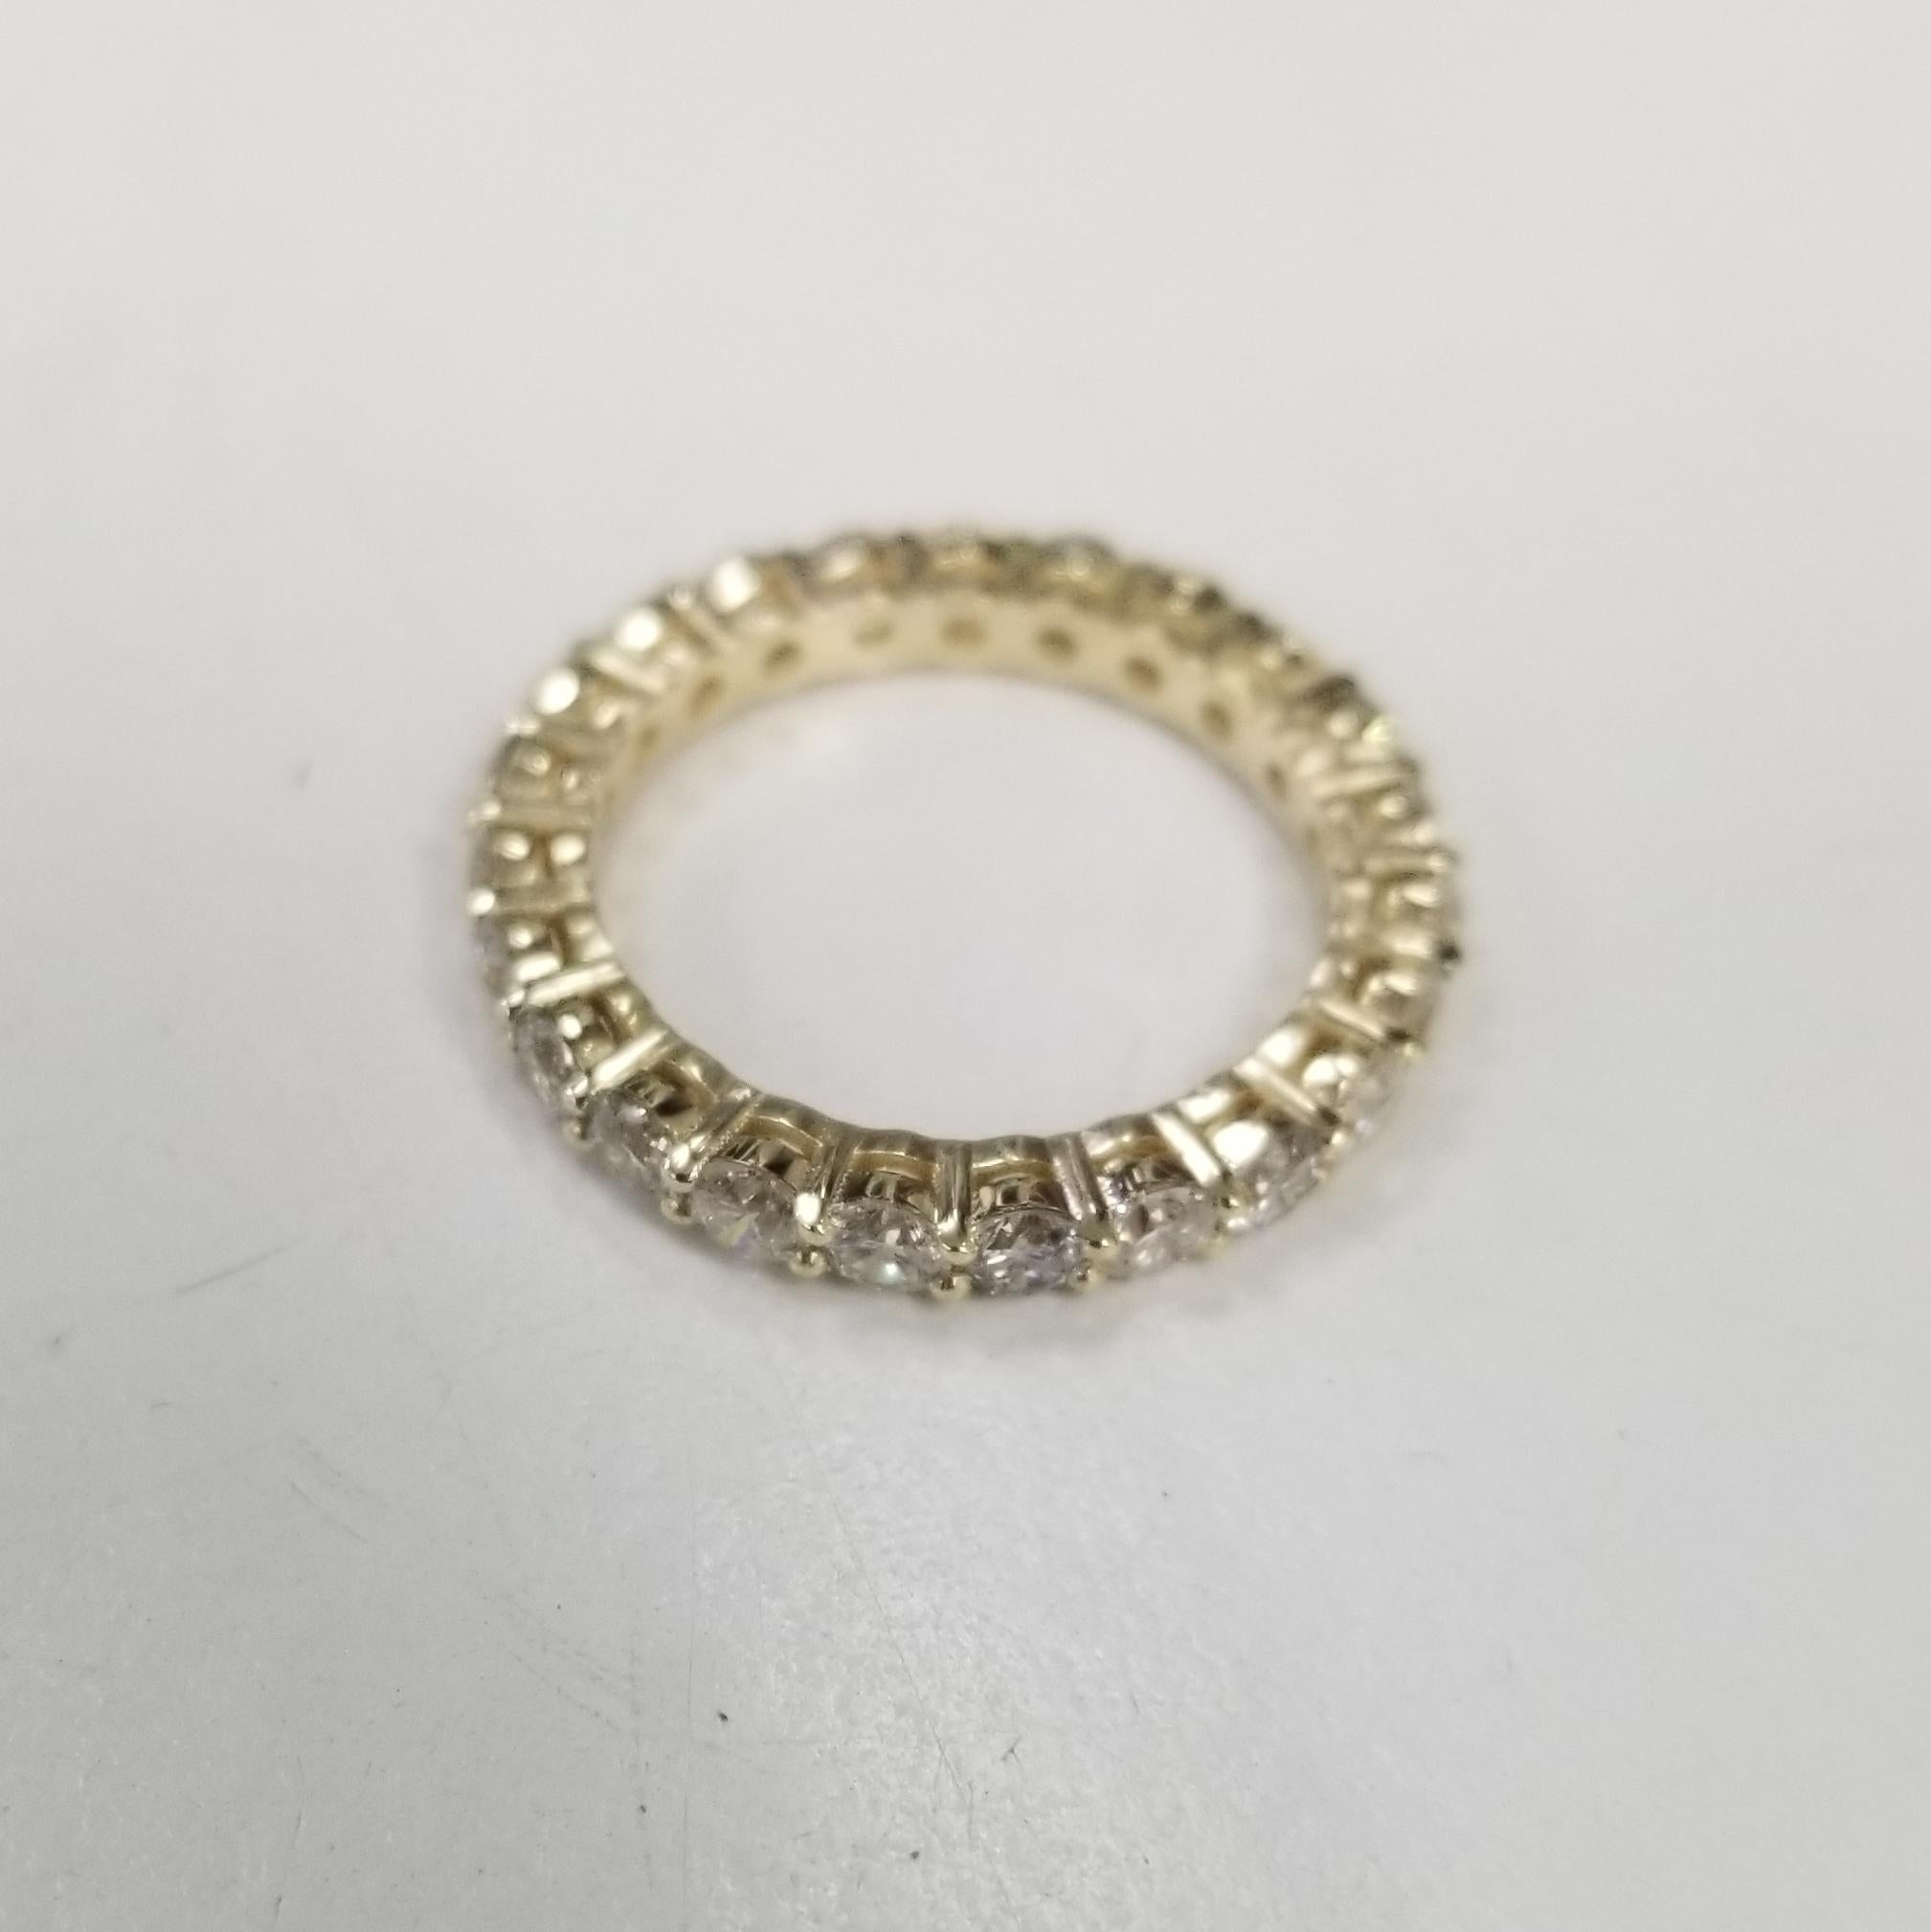  The eternity ring is set with close shared prongs to show each round diamond.
*Available in white or yellow gold*
Specifications:
    main stone: ROUND BRILLIANT DIAMONDS
    DIAMONDS: 23 PCS
    carat total weight: 2.58 CARAT TOTAL WEIGHT
   